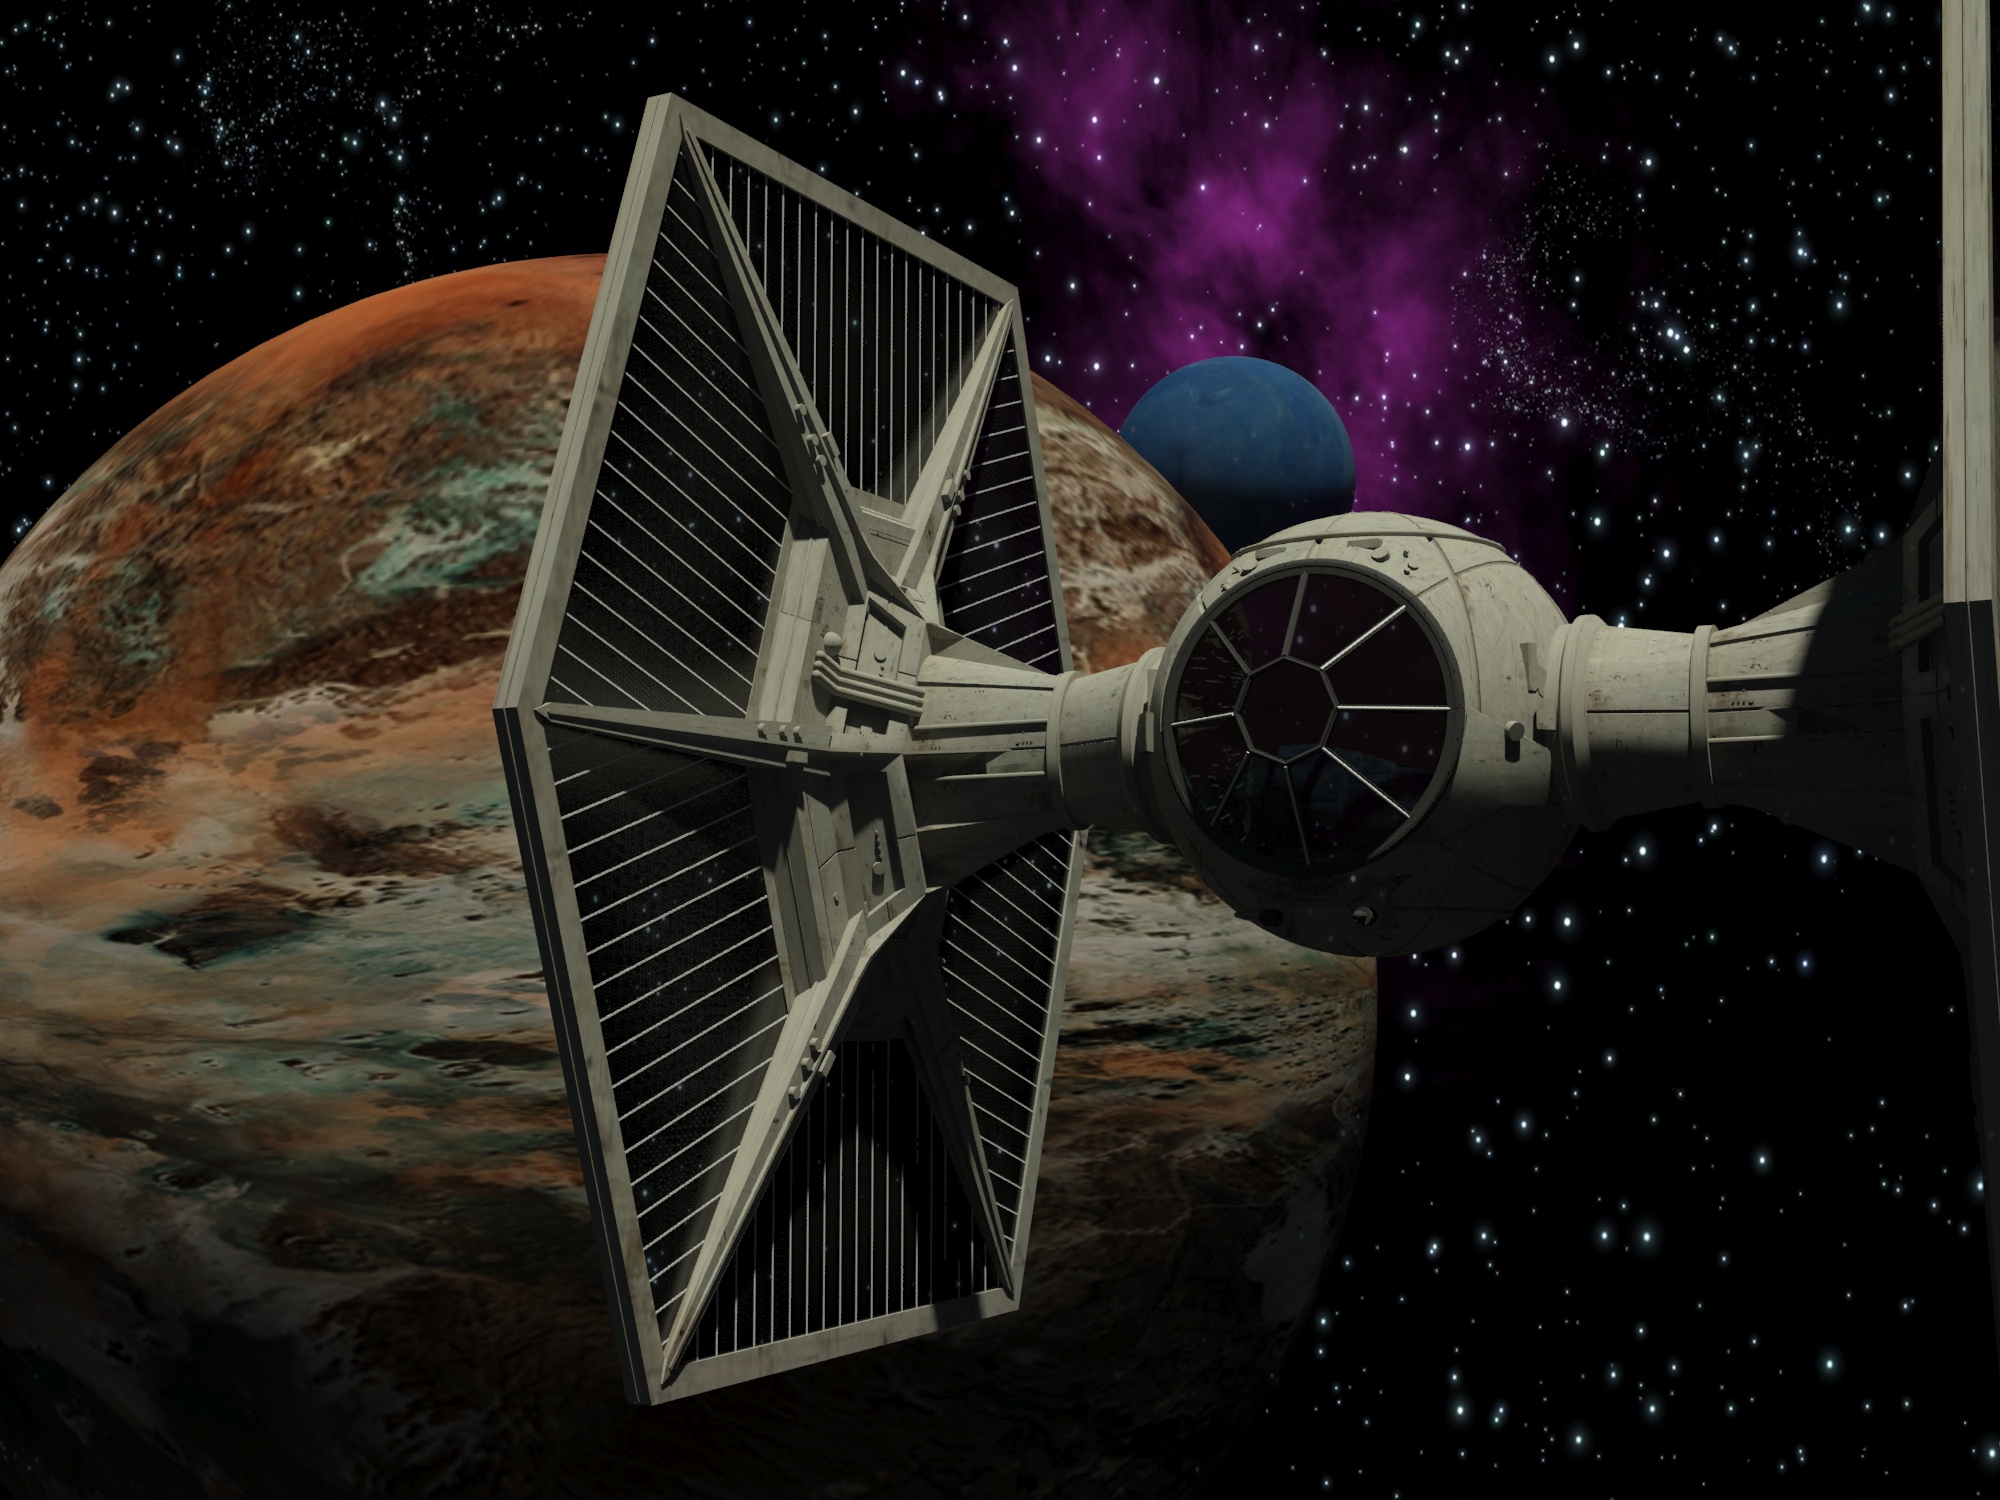 Tie Fighter by Avero on